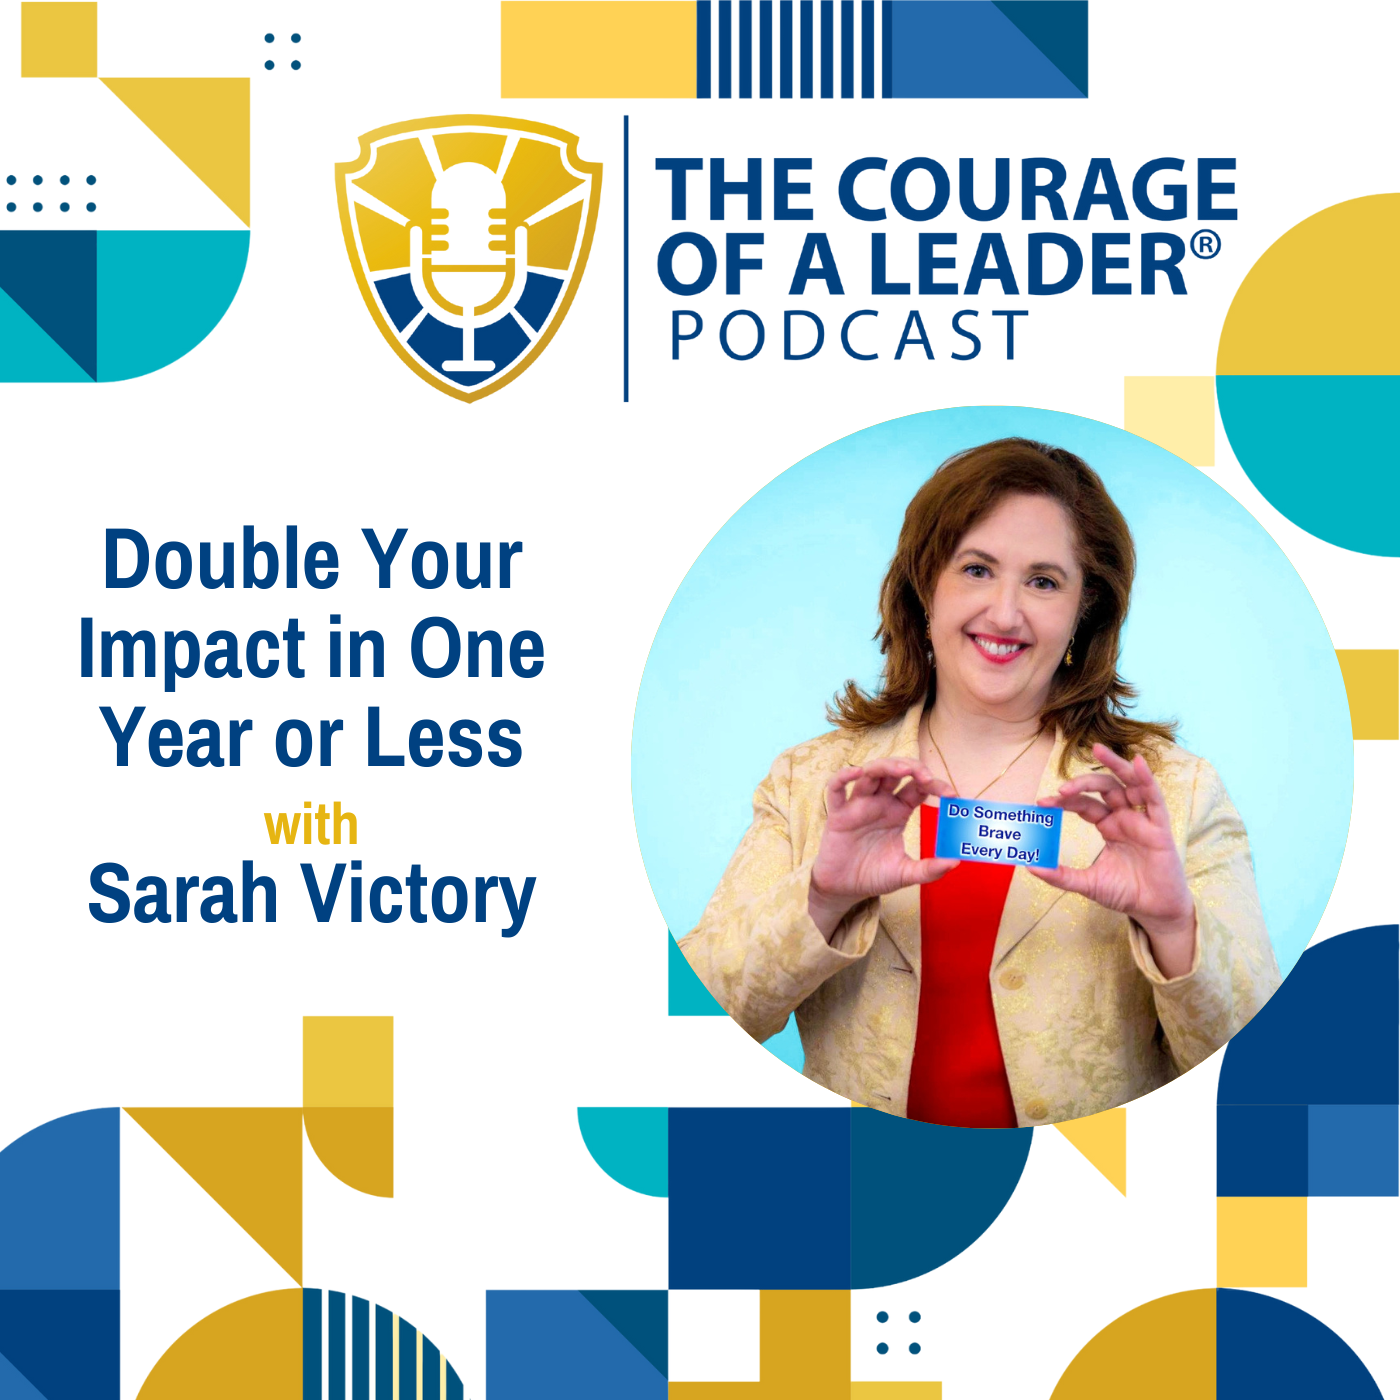 Double Your Impact in One Year or Less with Sarah Victory